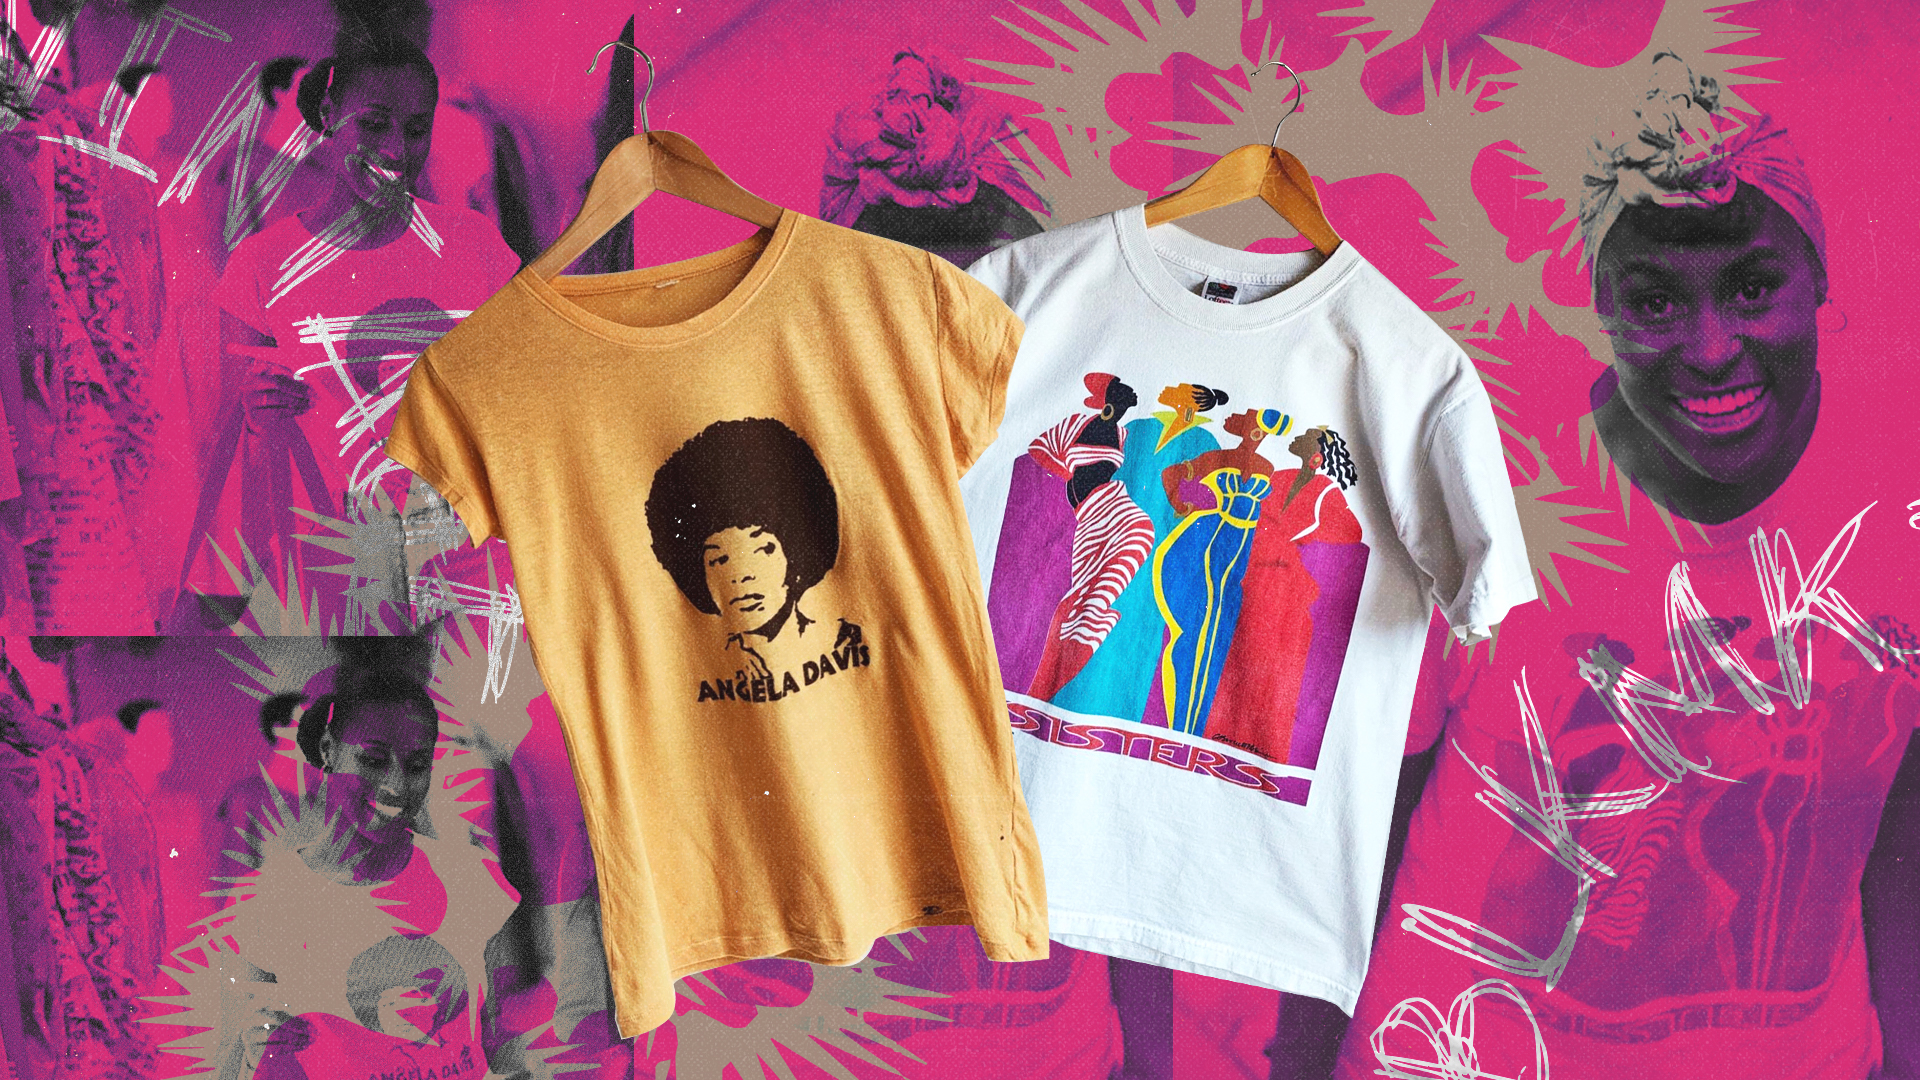 Meet the Vintage Dealers Who Source the T-Shirts Rae 'Insecure' | Complex